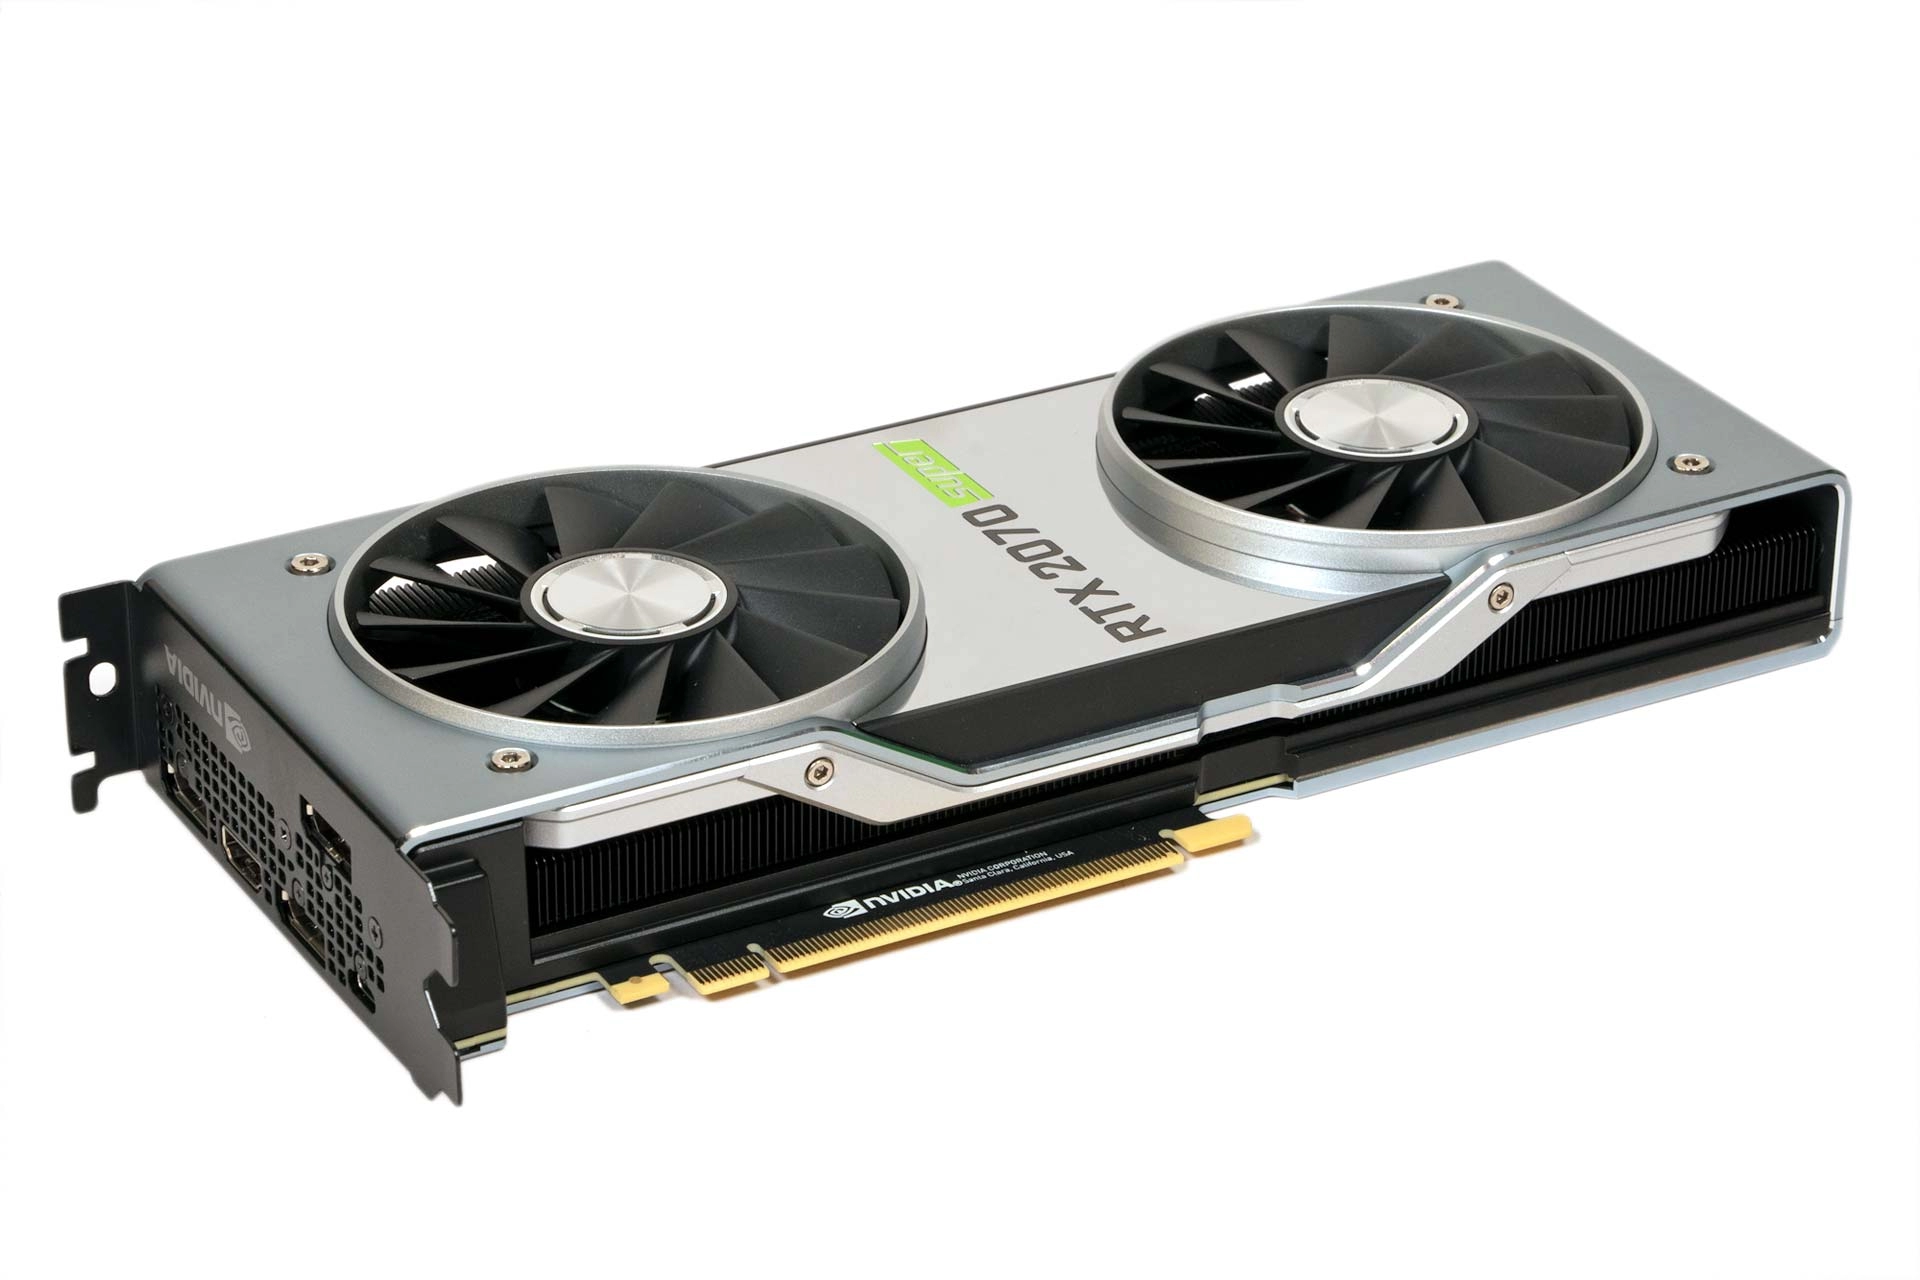 Nvidia GeForce RTX 2070 Super Founders Edition Behind View